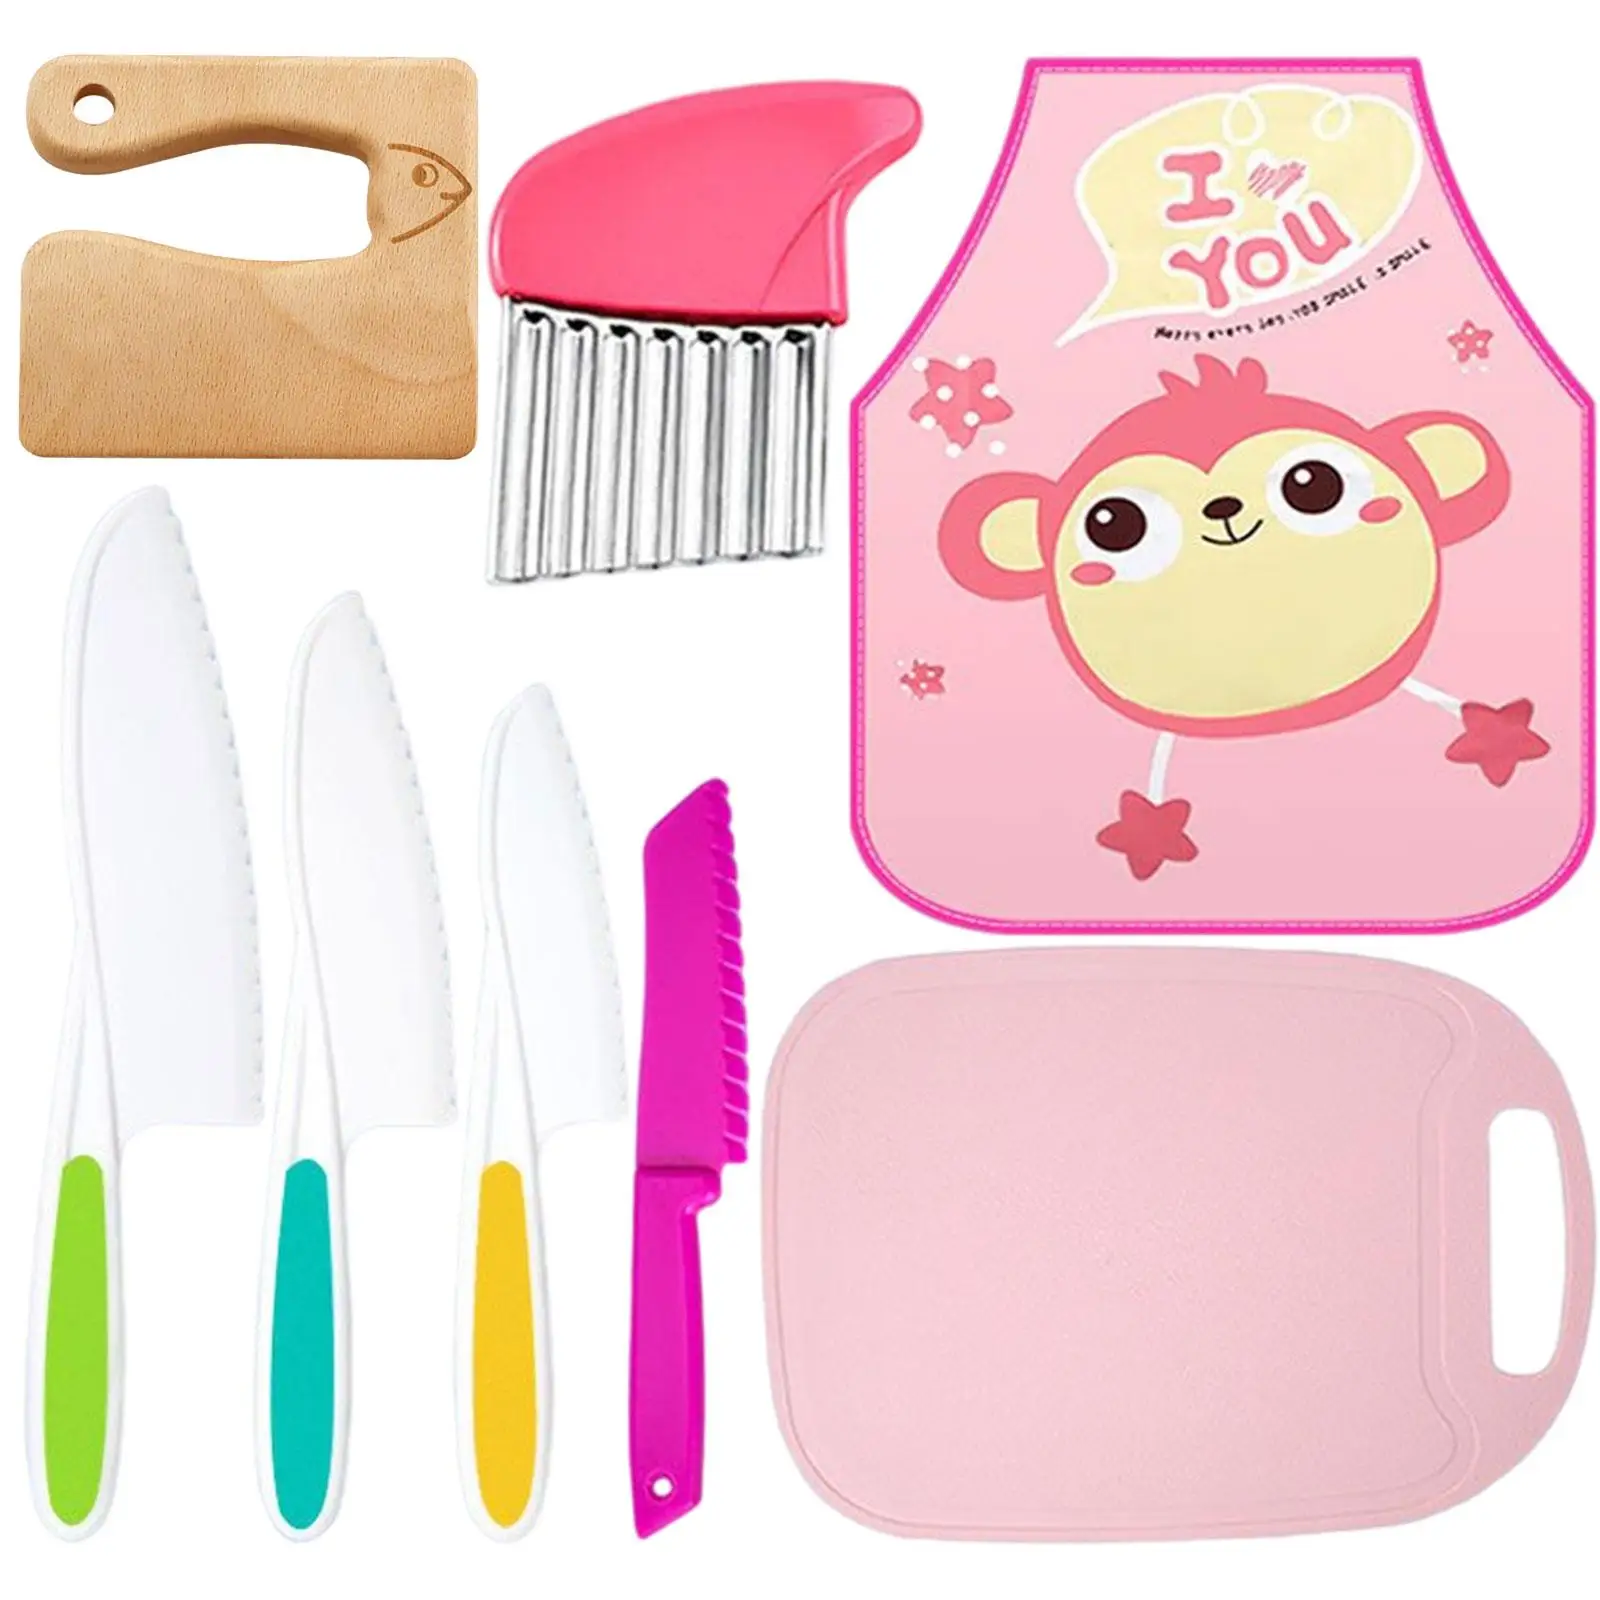 Kids Cooking Set Cooking Toys Cutting Board for Birthday Children Gifts